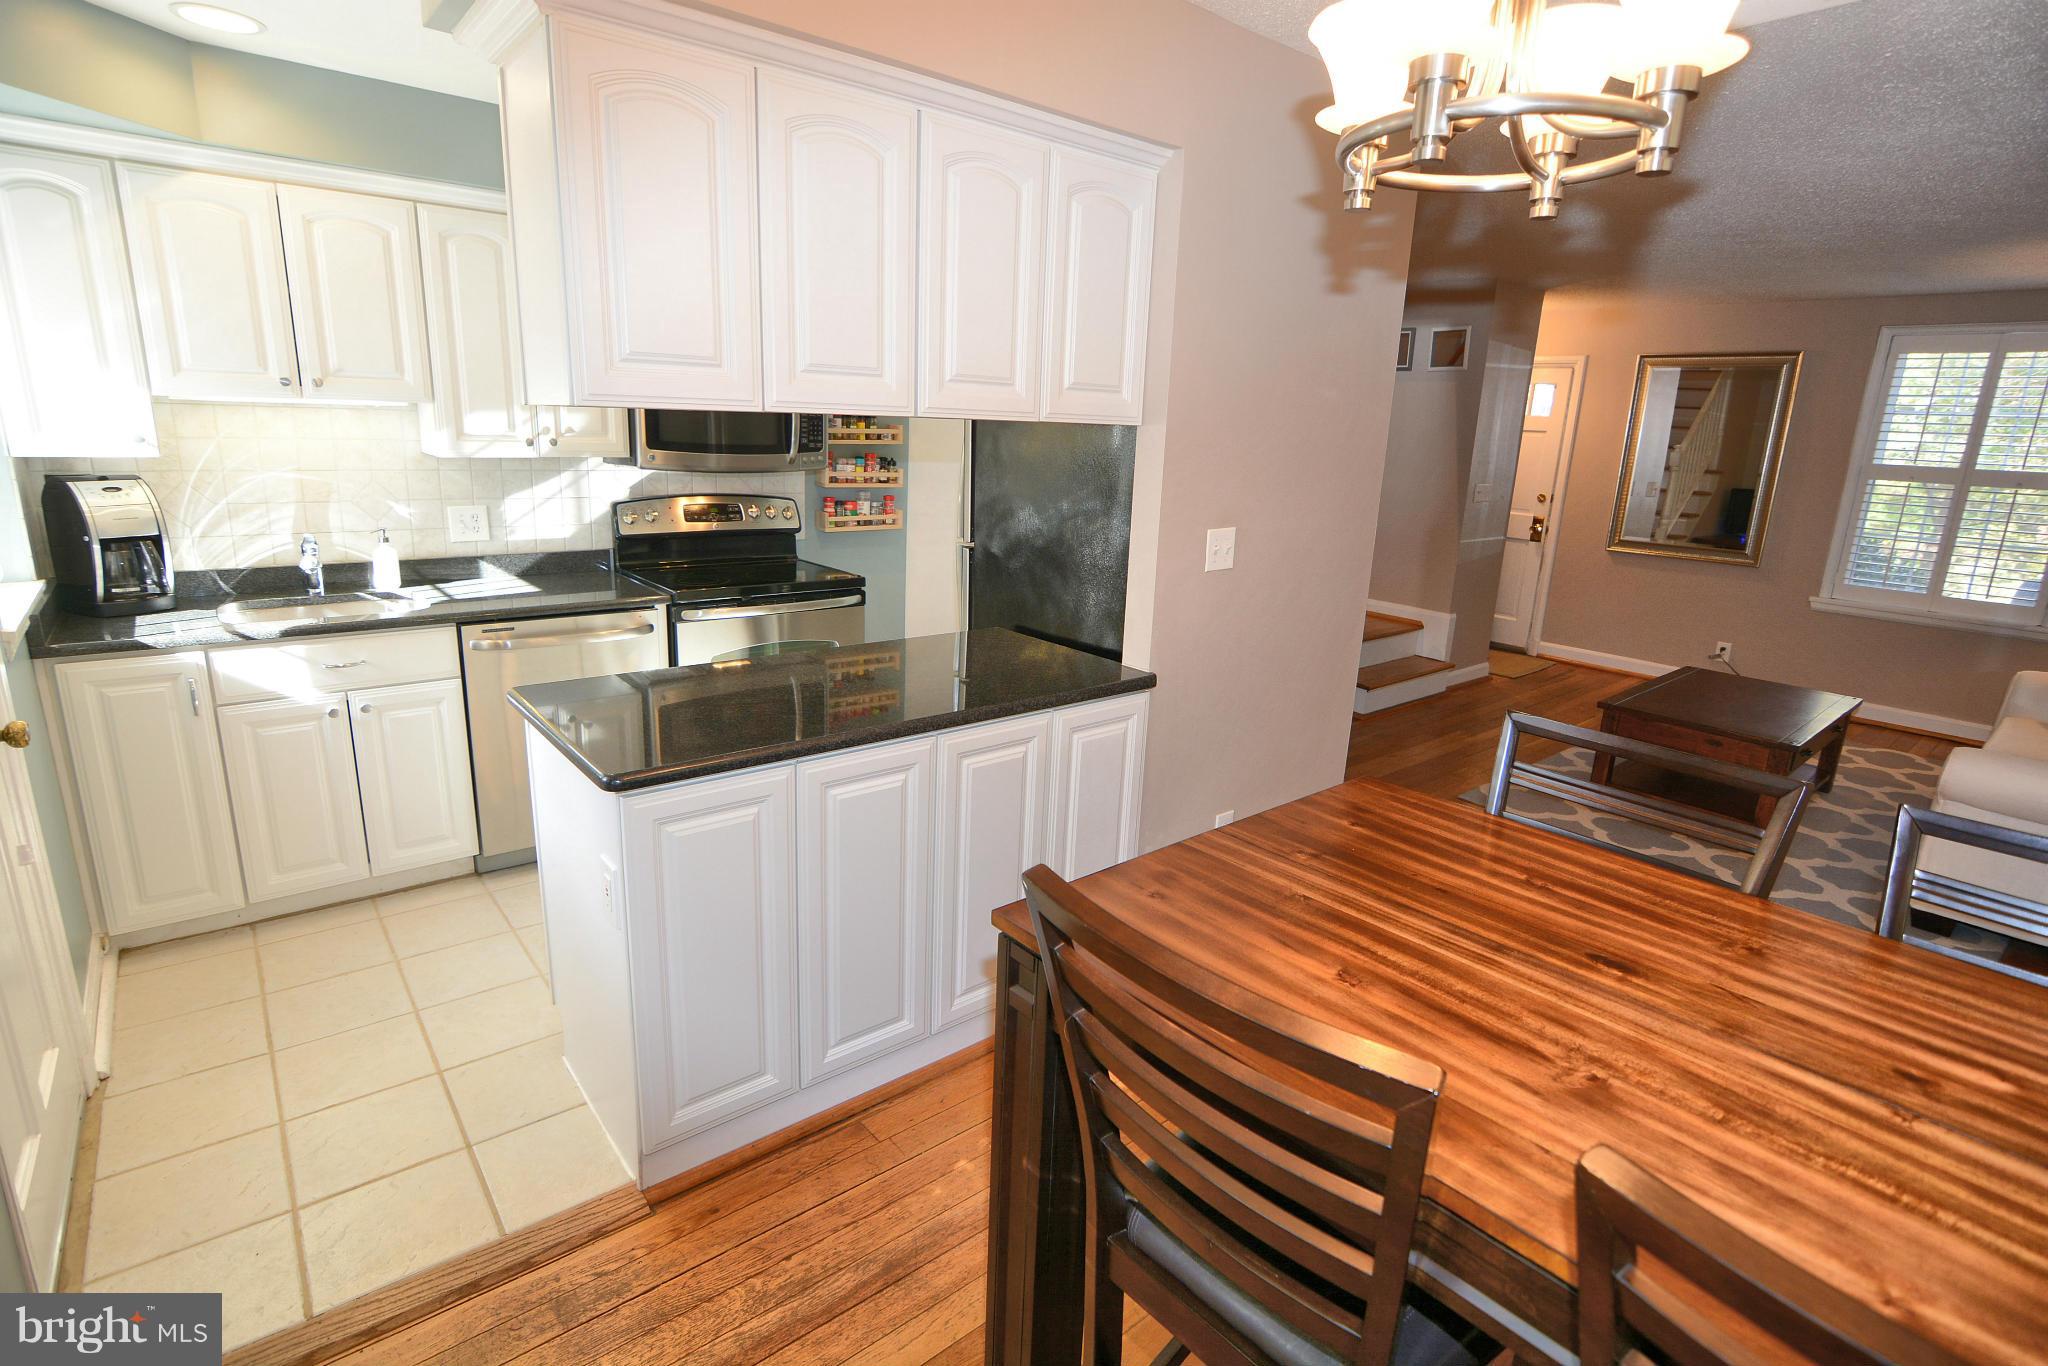 a kitchen with stainless steel appliances a white stove top oven a sink dishwasher and white cabinets with wooden floor